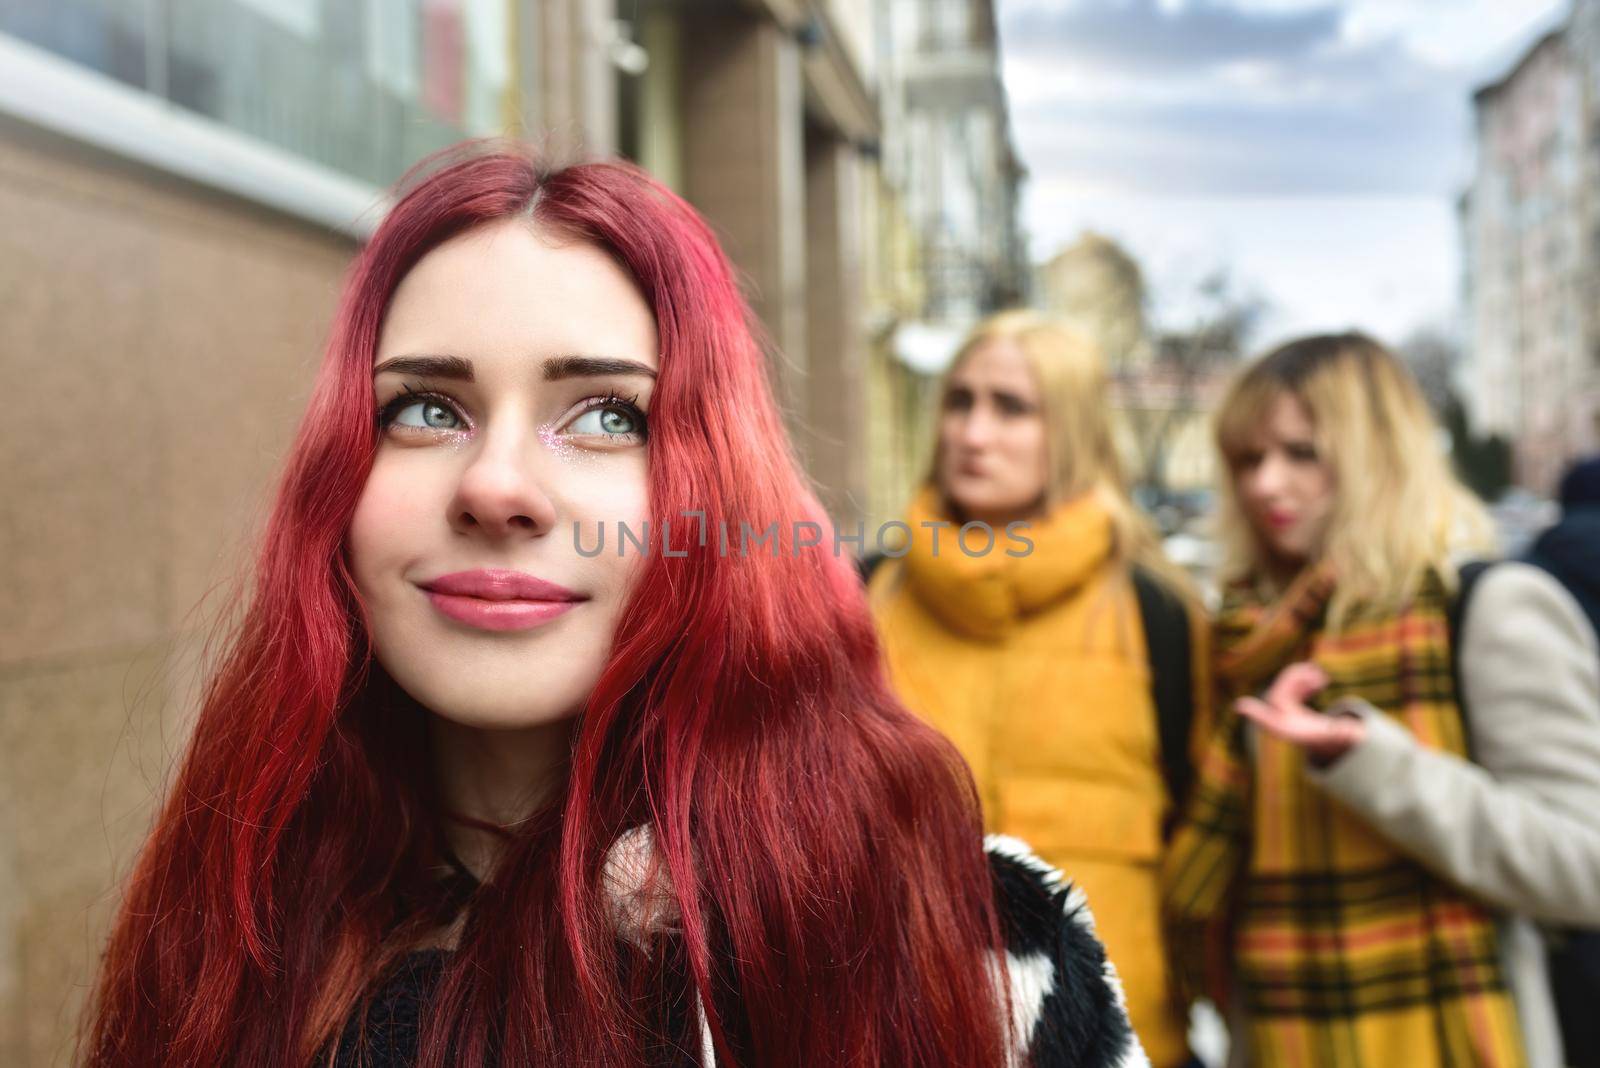 Self-confident teenage girl ignores jealous people who spread gossip behind her back. stop bullying. social problems by Nickstock